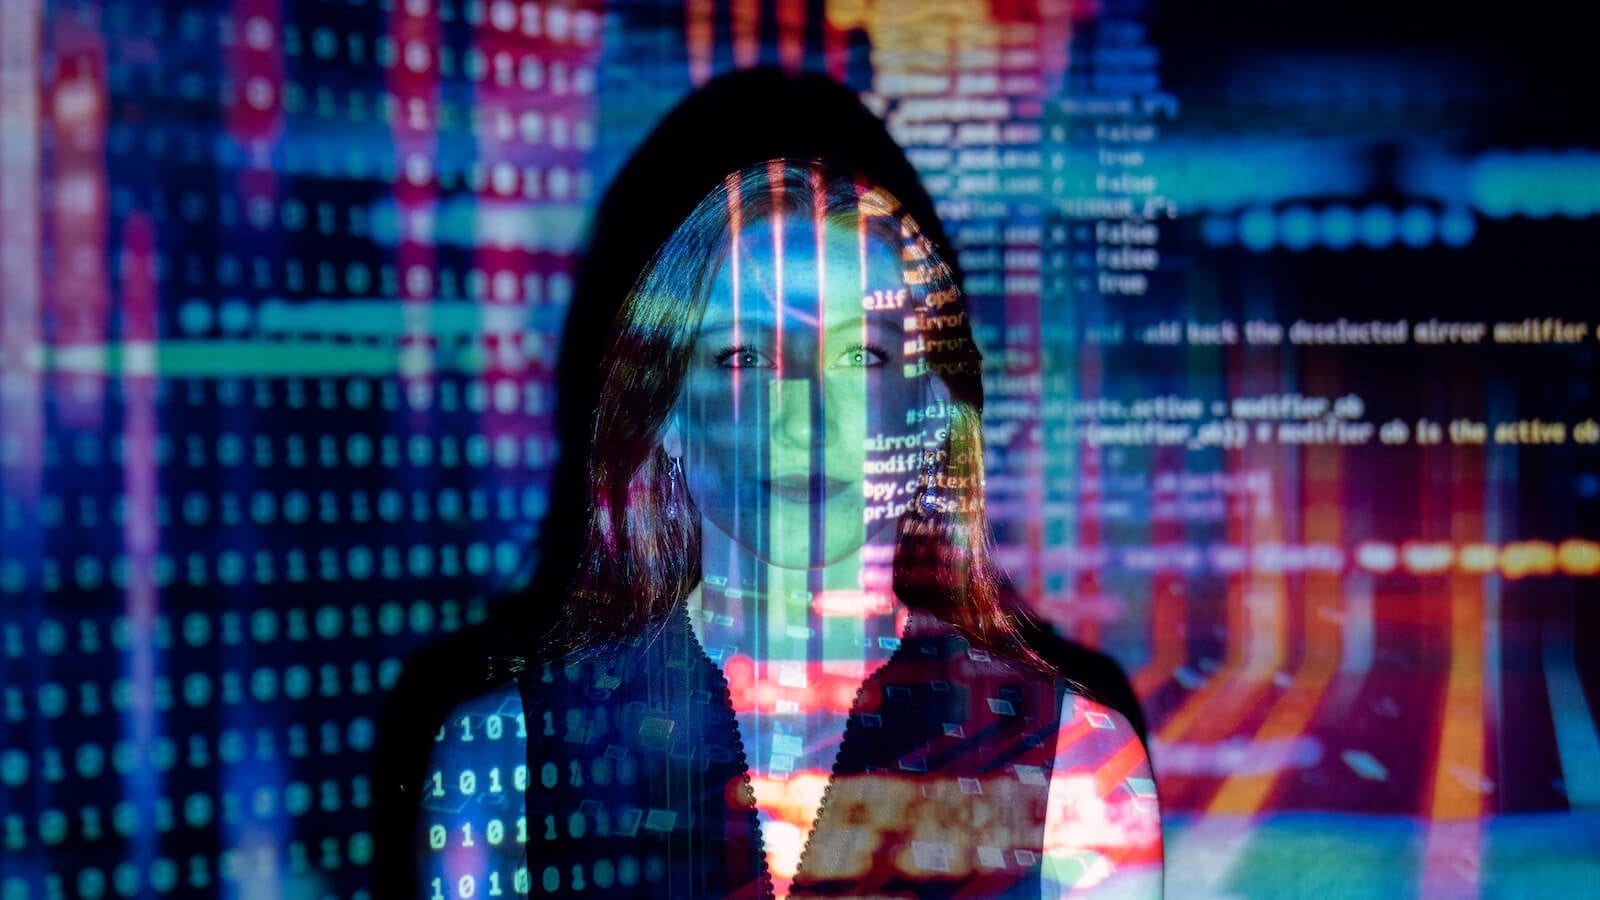 Code projected over a woman's face